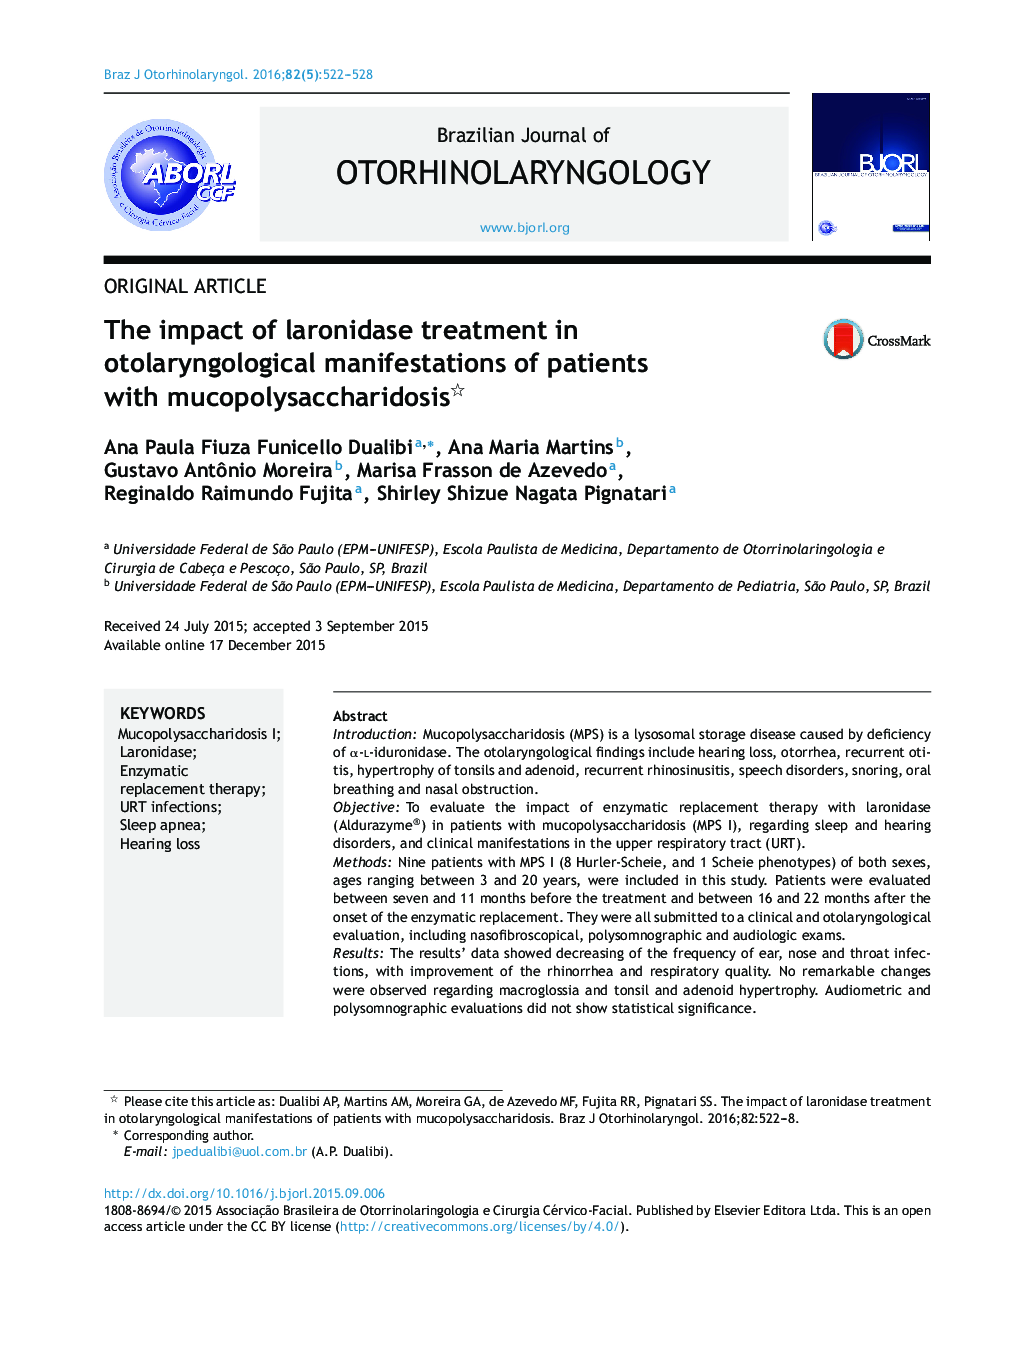 The impact of laronidase treatment in otolaryngological manifestations of patients with mucopolysaccharidosis 